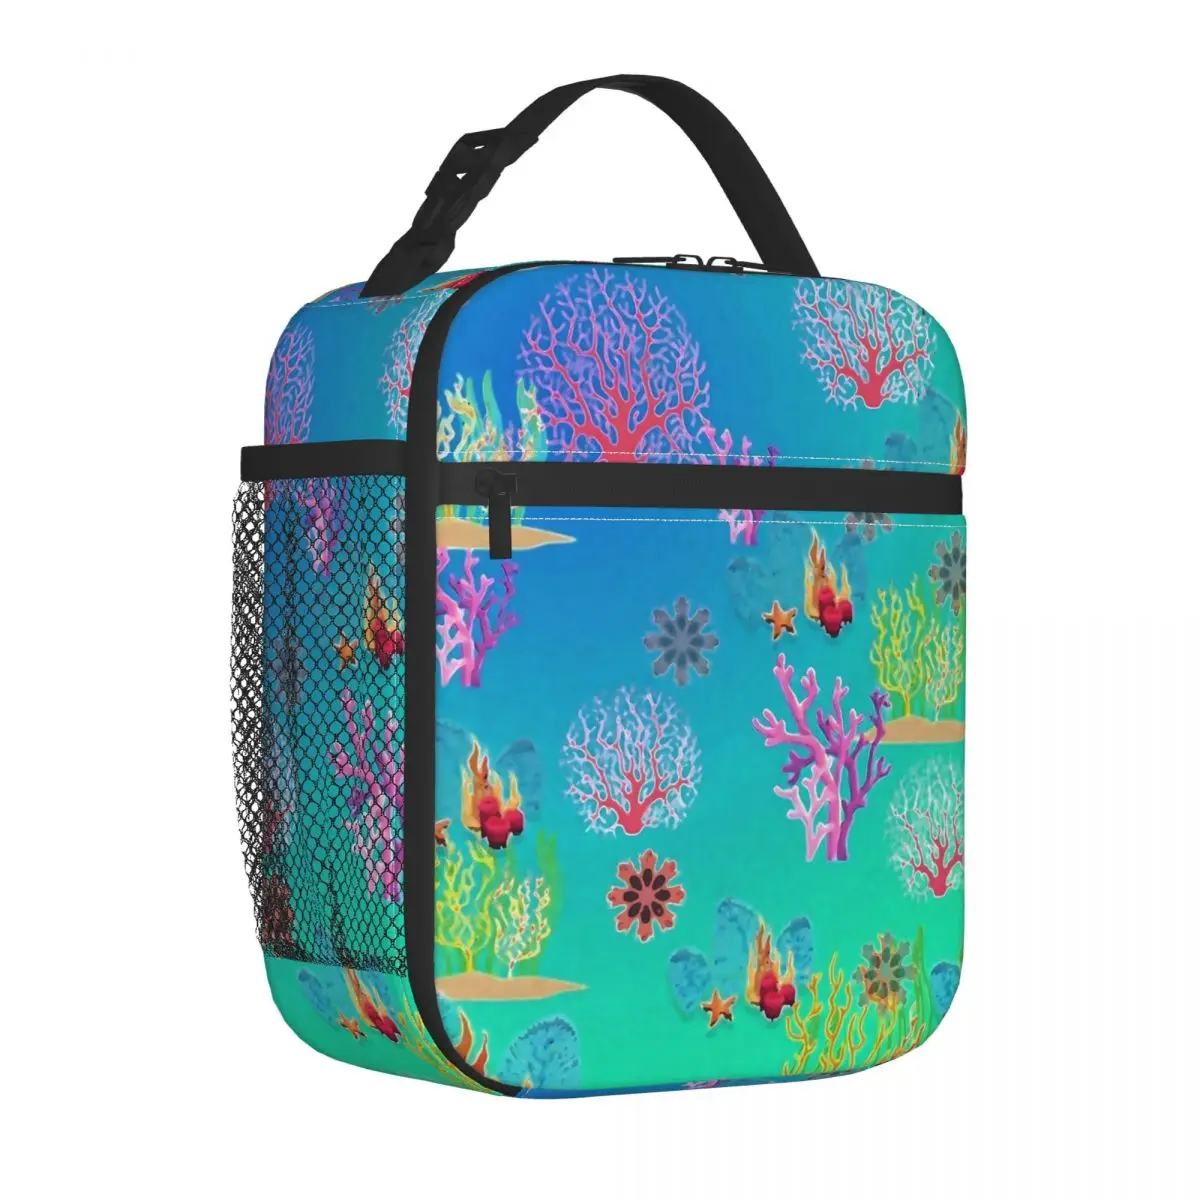 

Tropical Marine Print Lunch Bag Coral Floral Design School Lunch Box For Child Custom Thermal Tote Handbags Oxford Cooler Bag